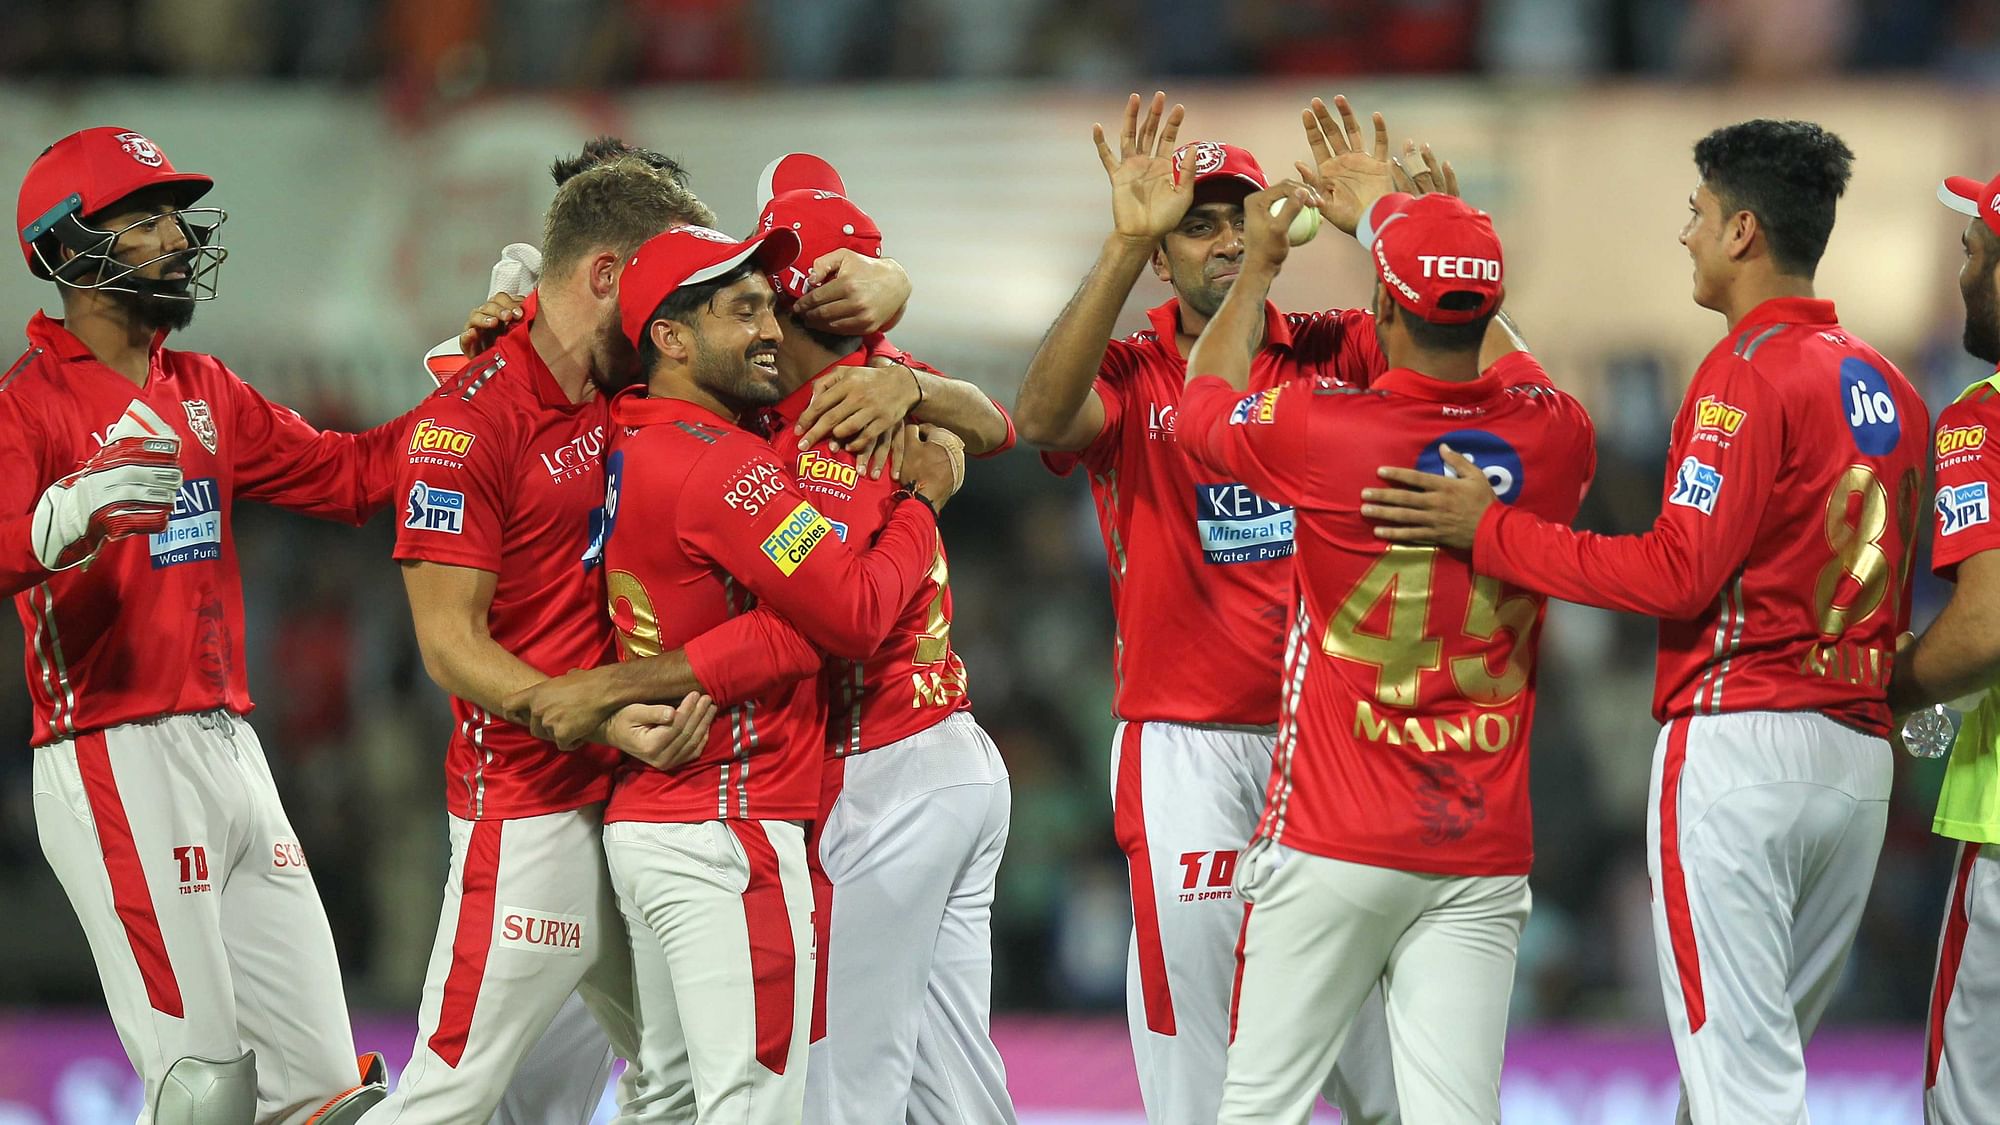 Kings XI Punjab players celebrate a wicket during their 6 wicket win over Rajasthan Royals on Sunday in Indore.